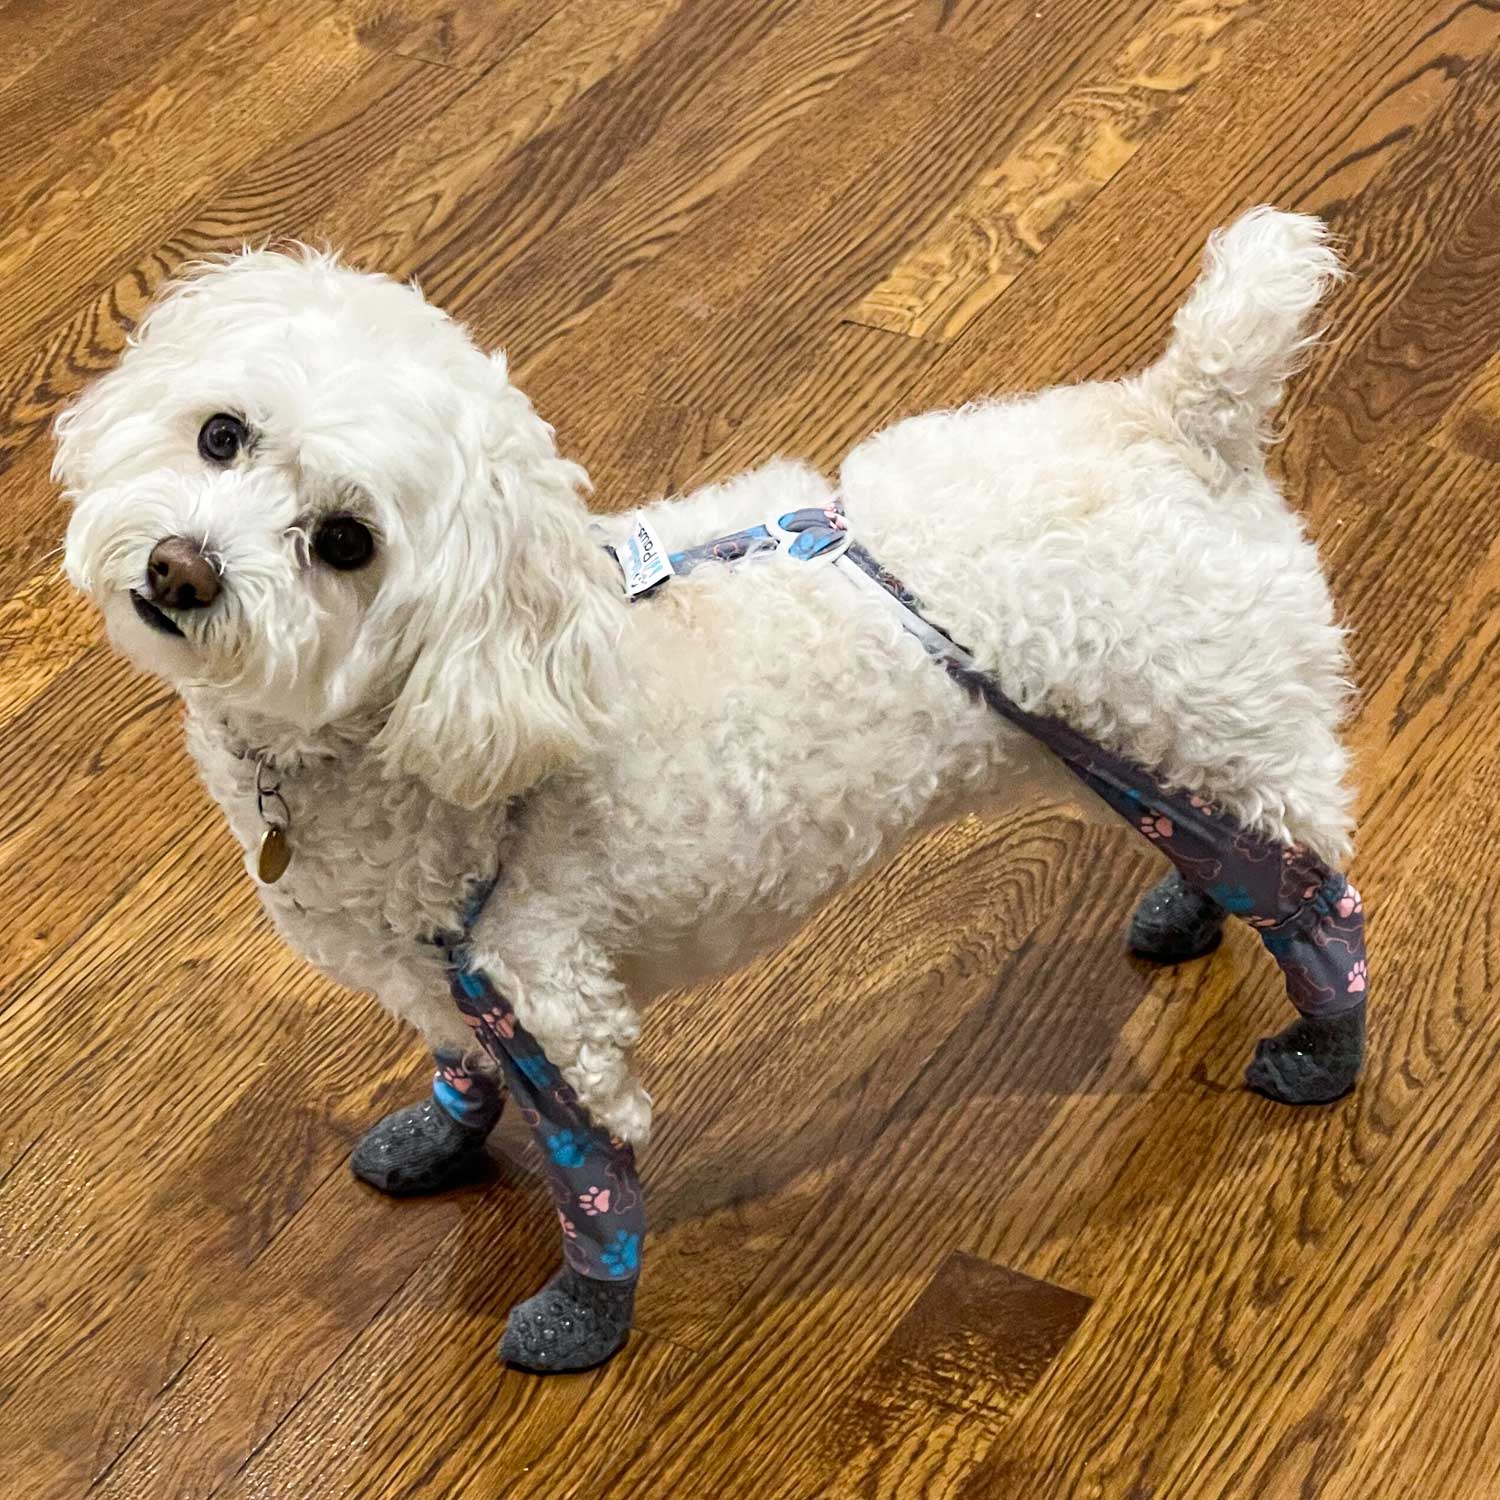 Dog Pants To Prevent Licking For Breeds